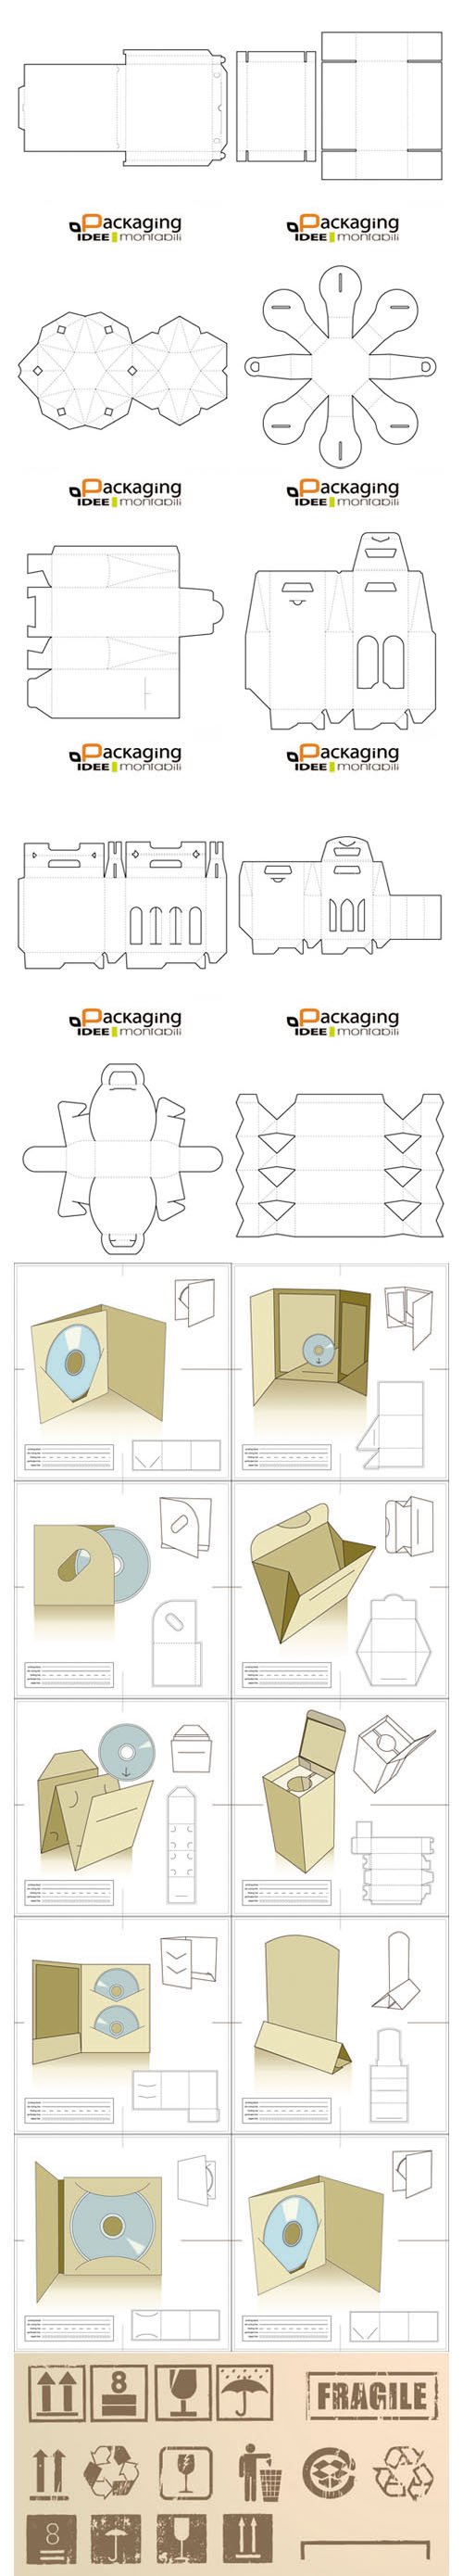 35 Packaging Molds and Templates in Vector